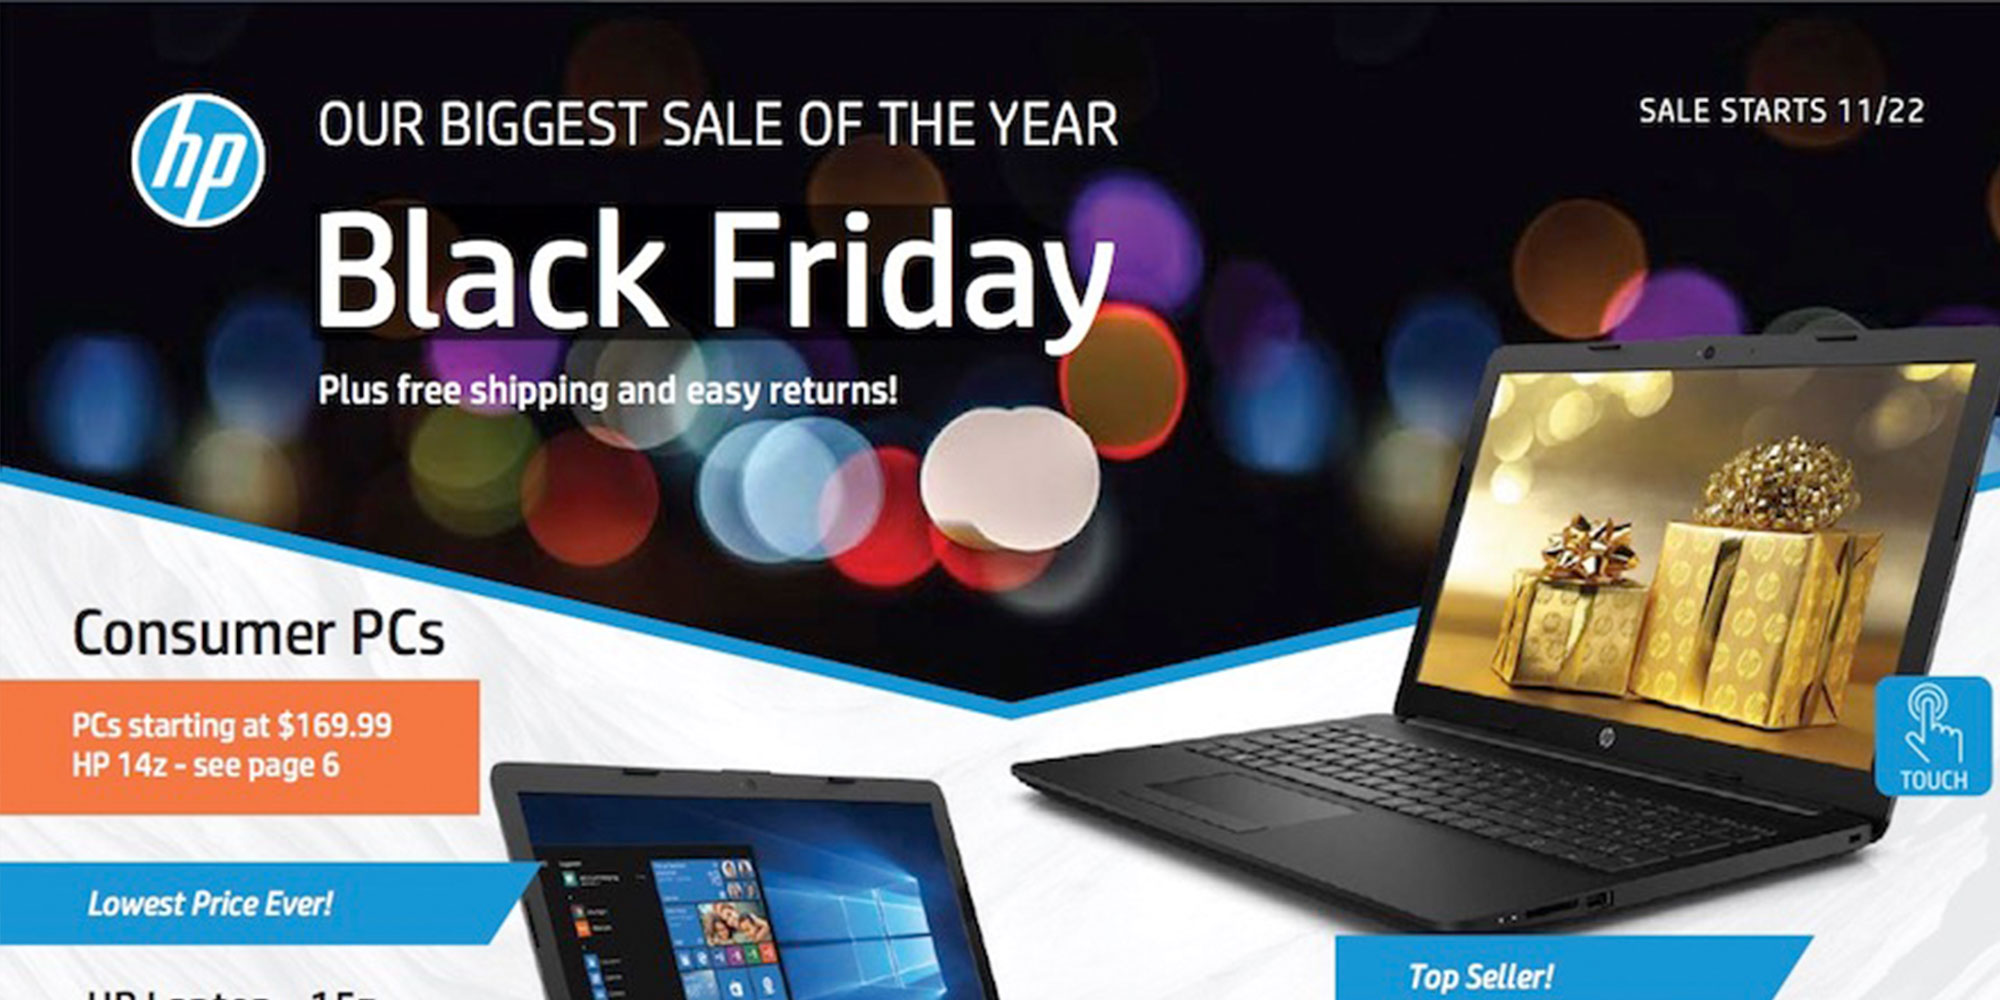 HP Black Friday 2018 ad: Doorbusters, free shipping, more - 9to5Toys